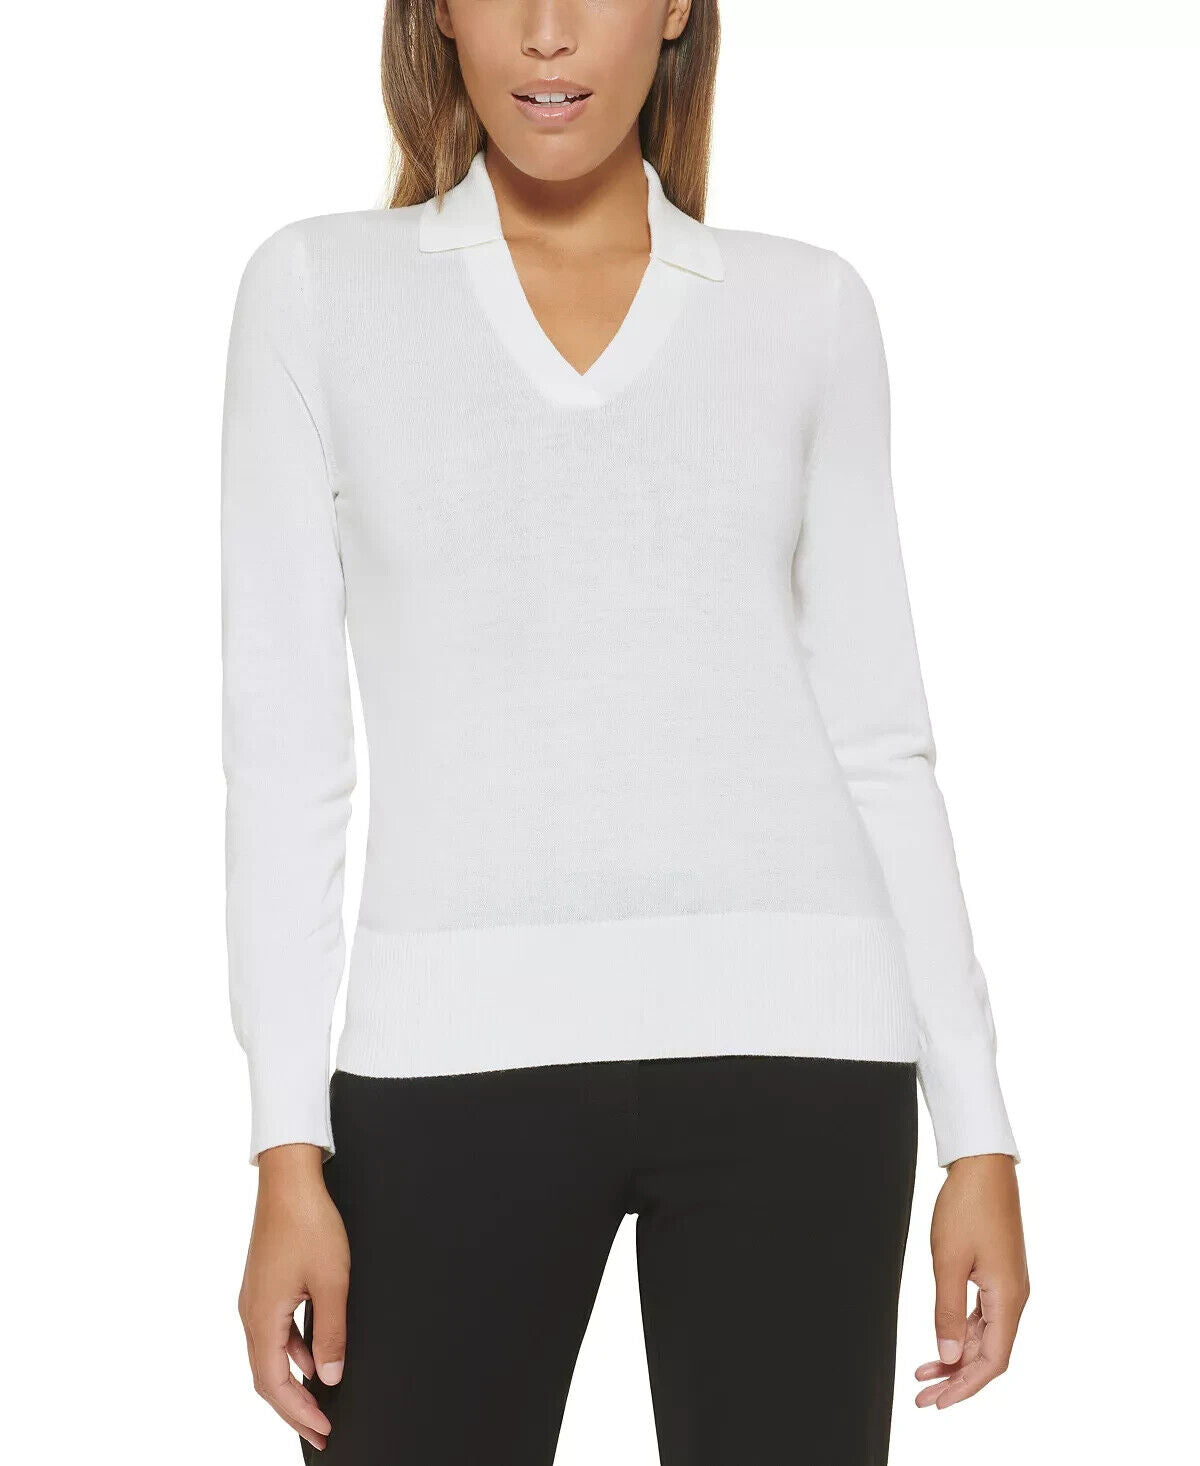 Calvin Klein Petite Collared Pull On Sweater MSRP $79 Size PM # 5C 2389 NEW